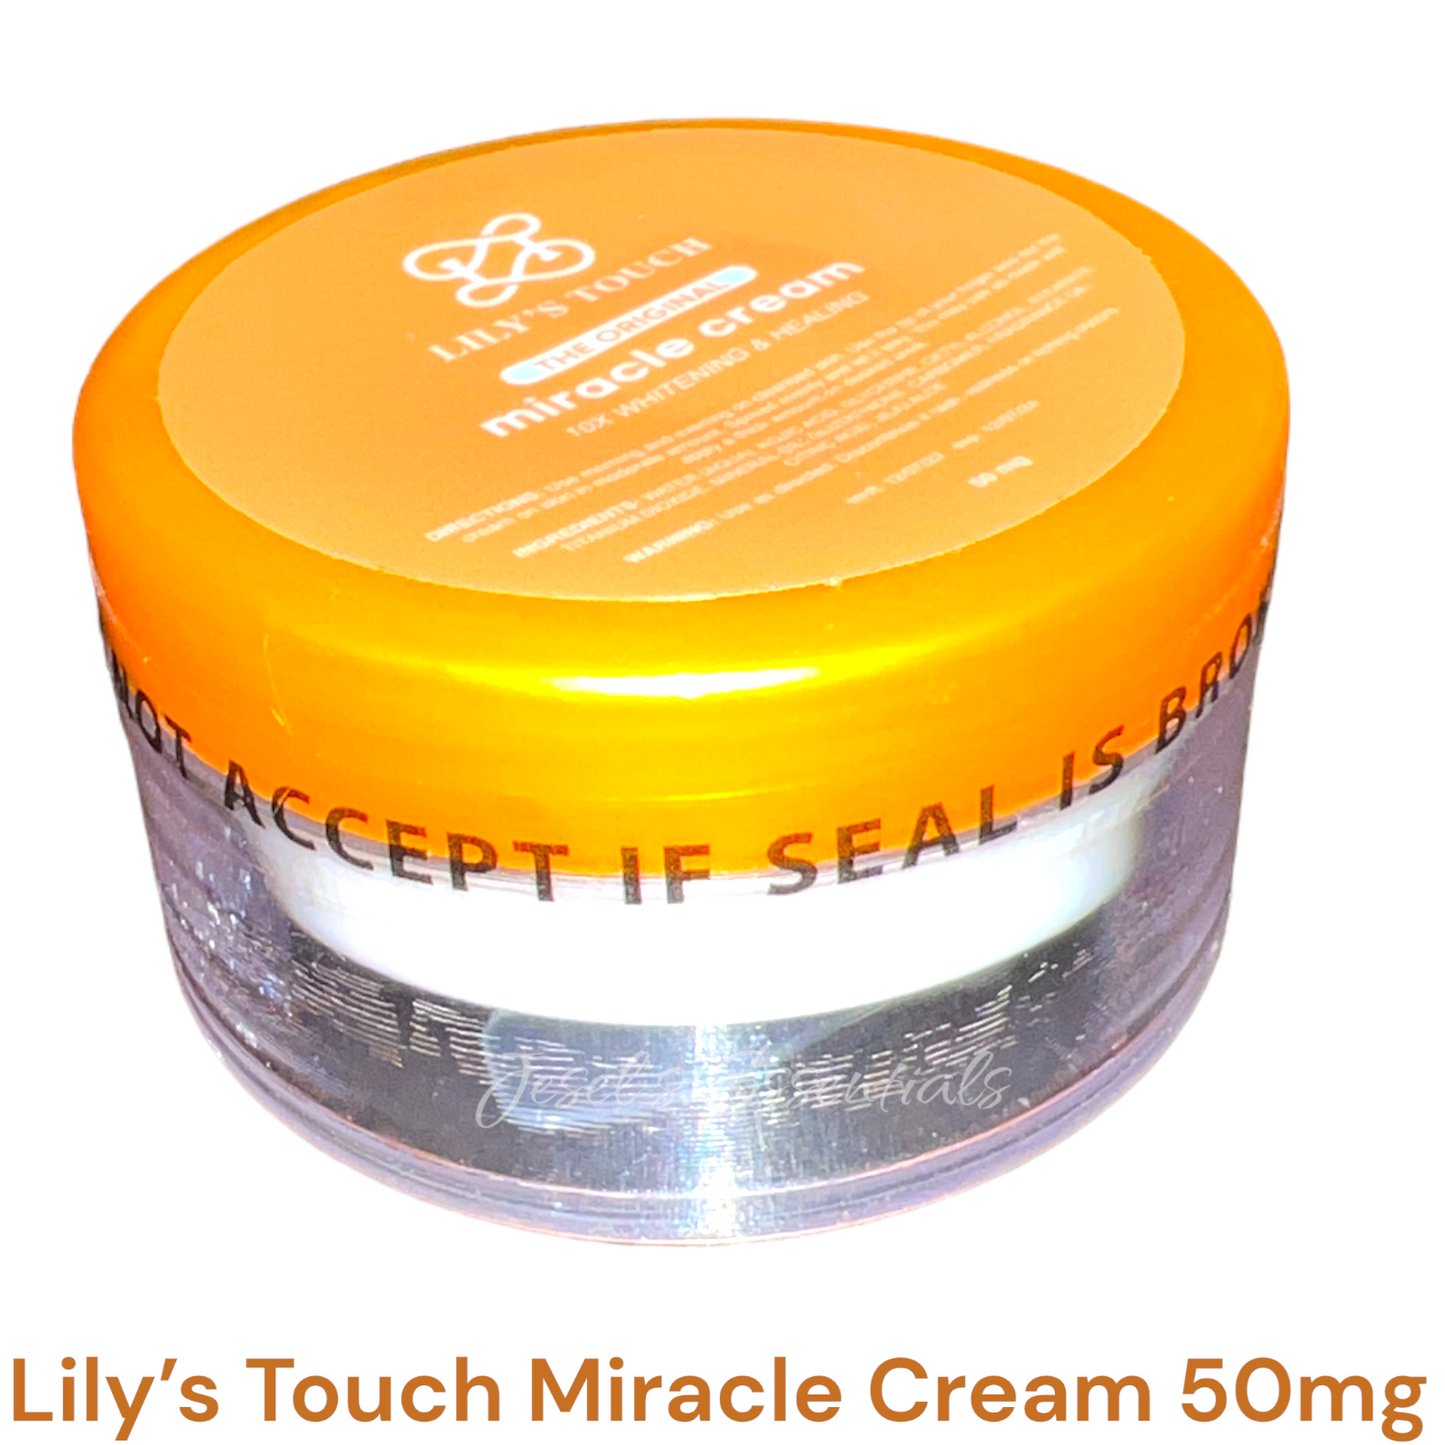 Lily’s Touch Miracle Cream